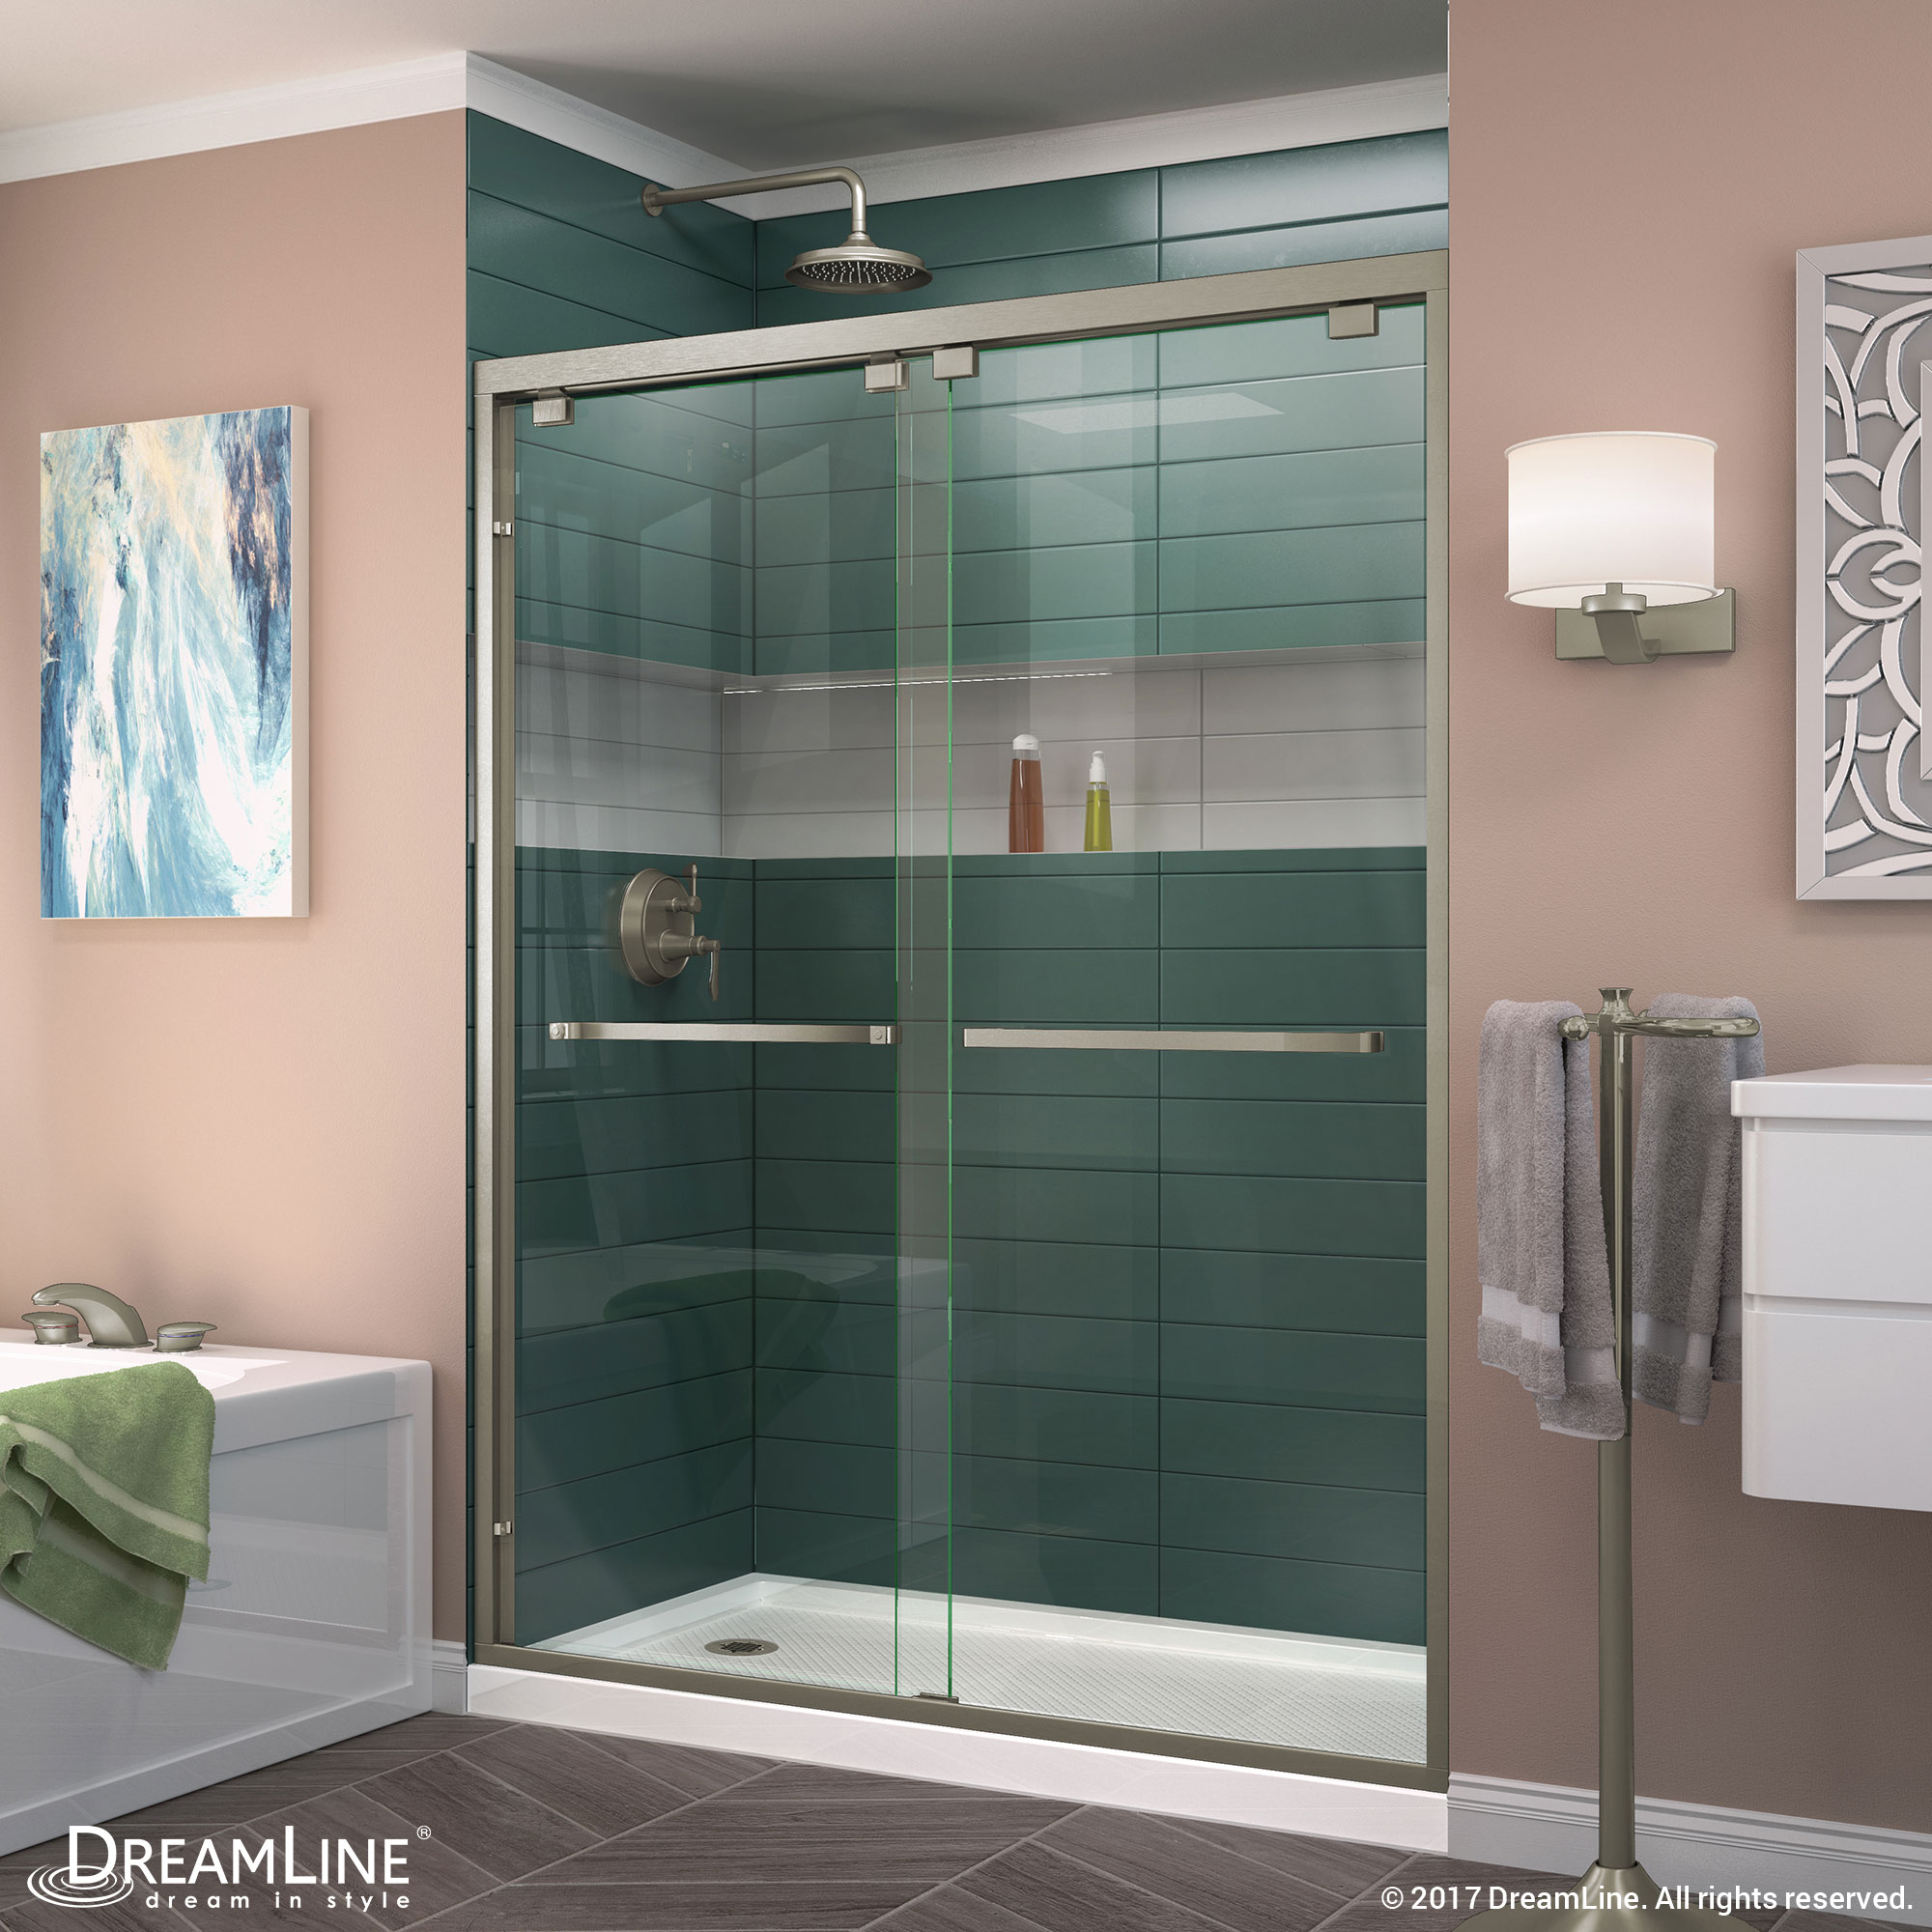 DreamLine Encore 30 in. D x 60 in. W x 78 3/4 in. H Bypass Shower Door in Chrome and Left Drain White Base Kit